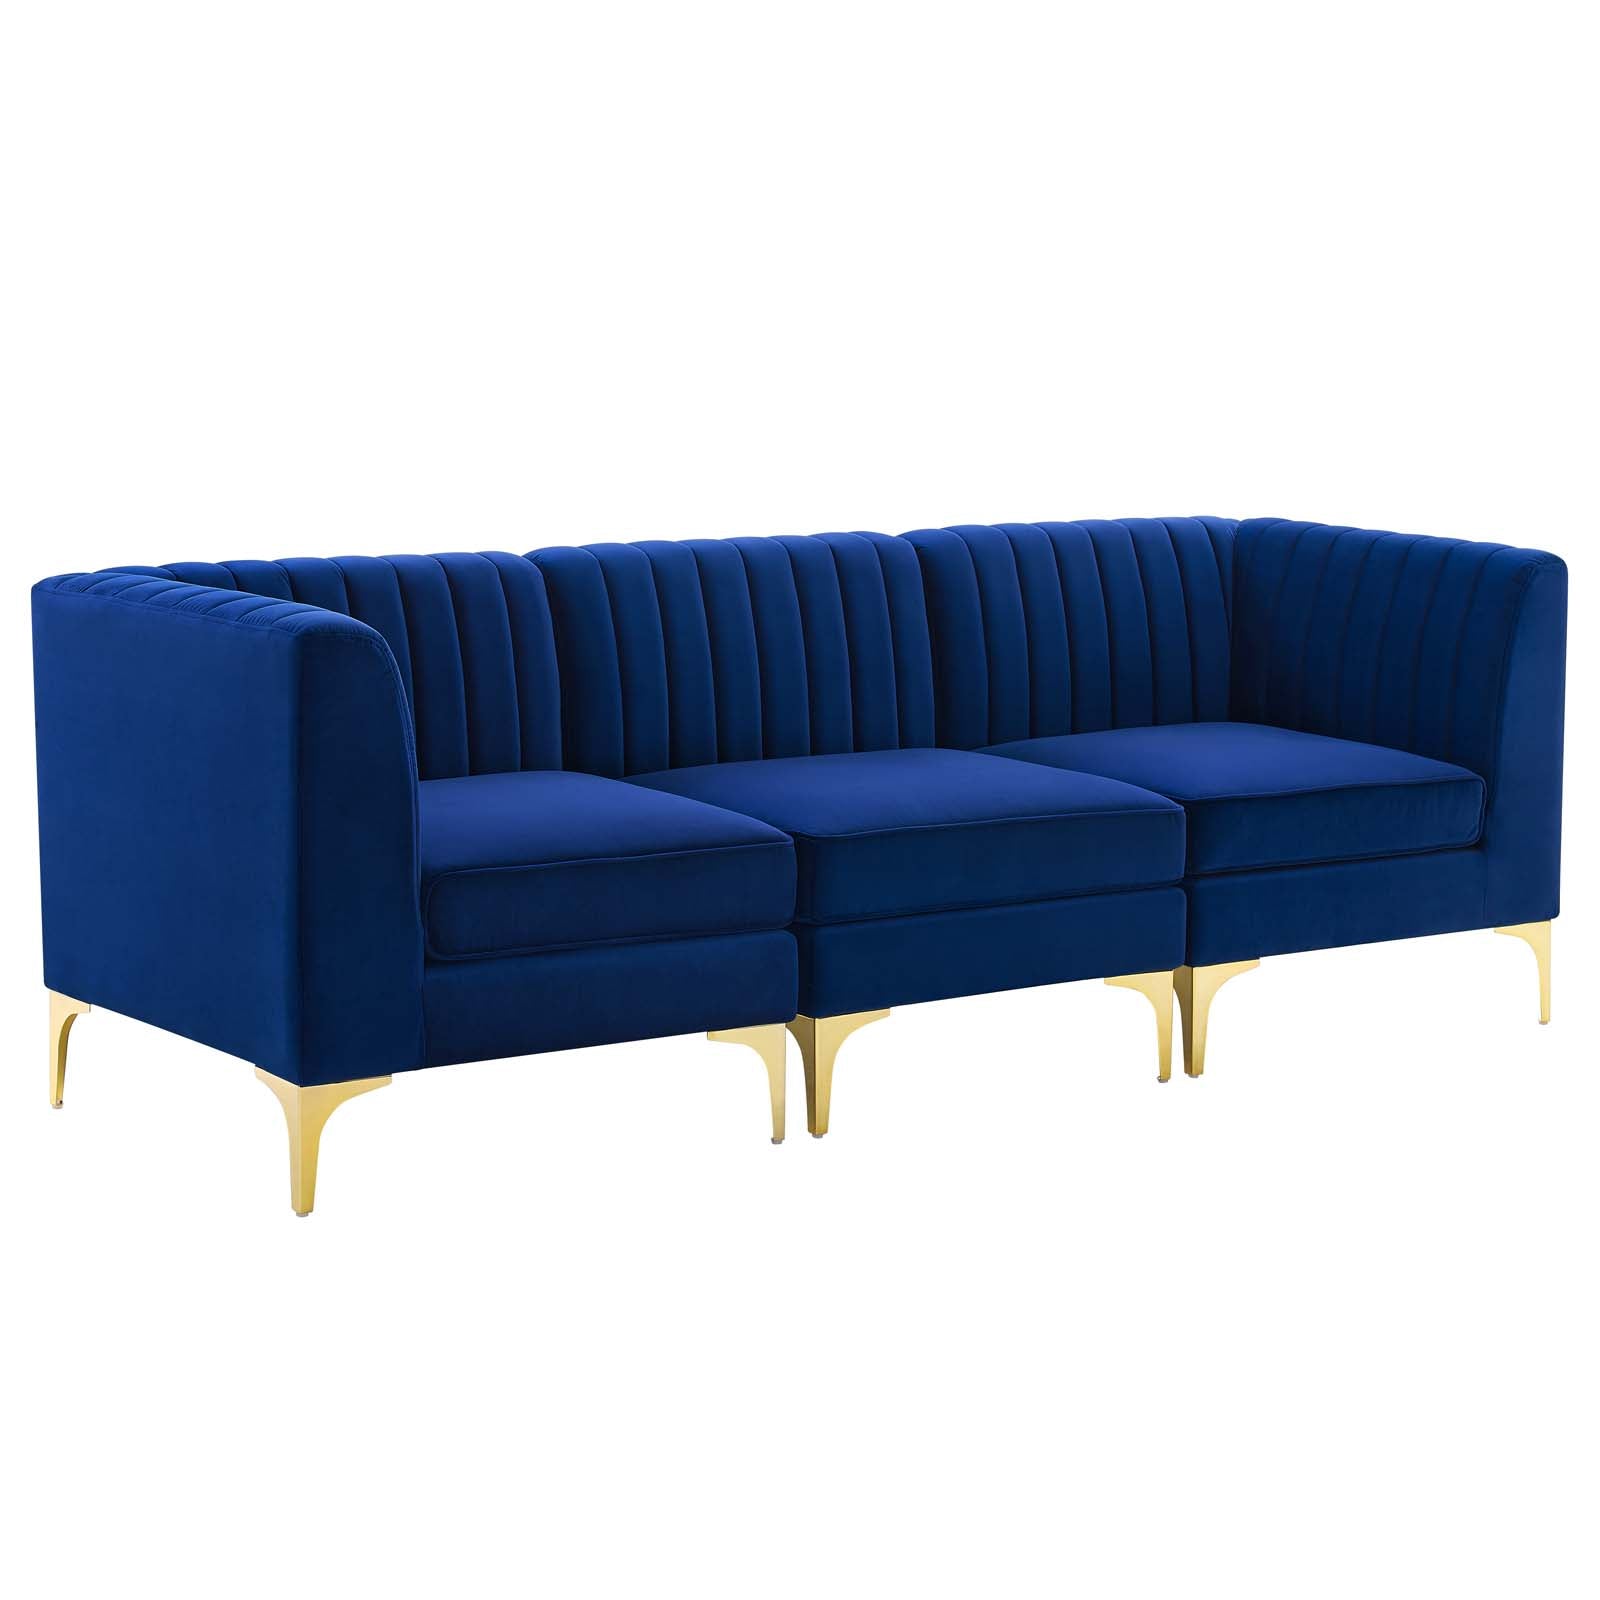 Modway Sofas & Couches - Triumph Channel Tufted Performance Velvet 3-Seater Sofa Navy